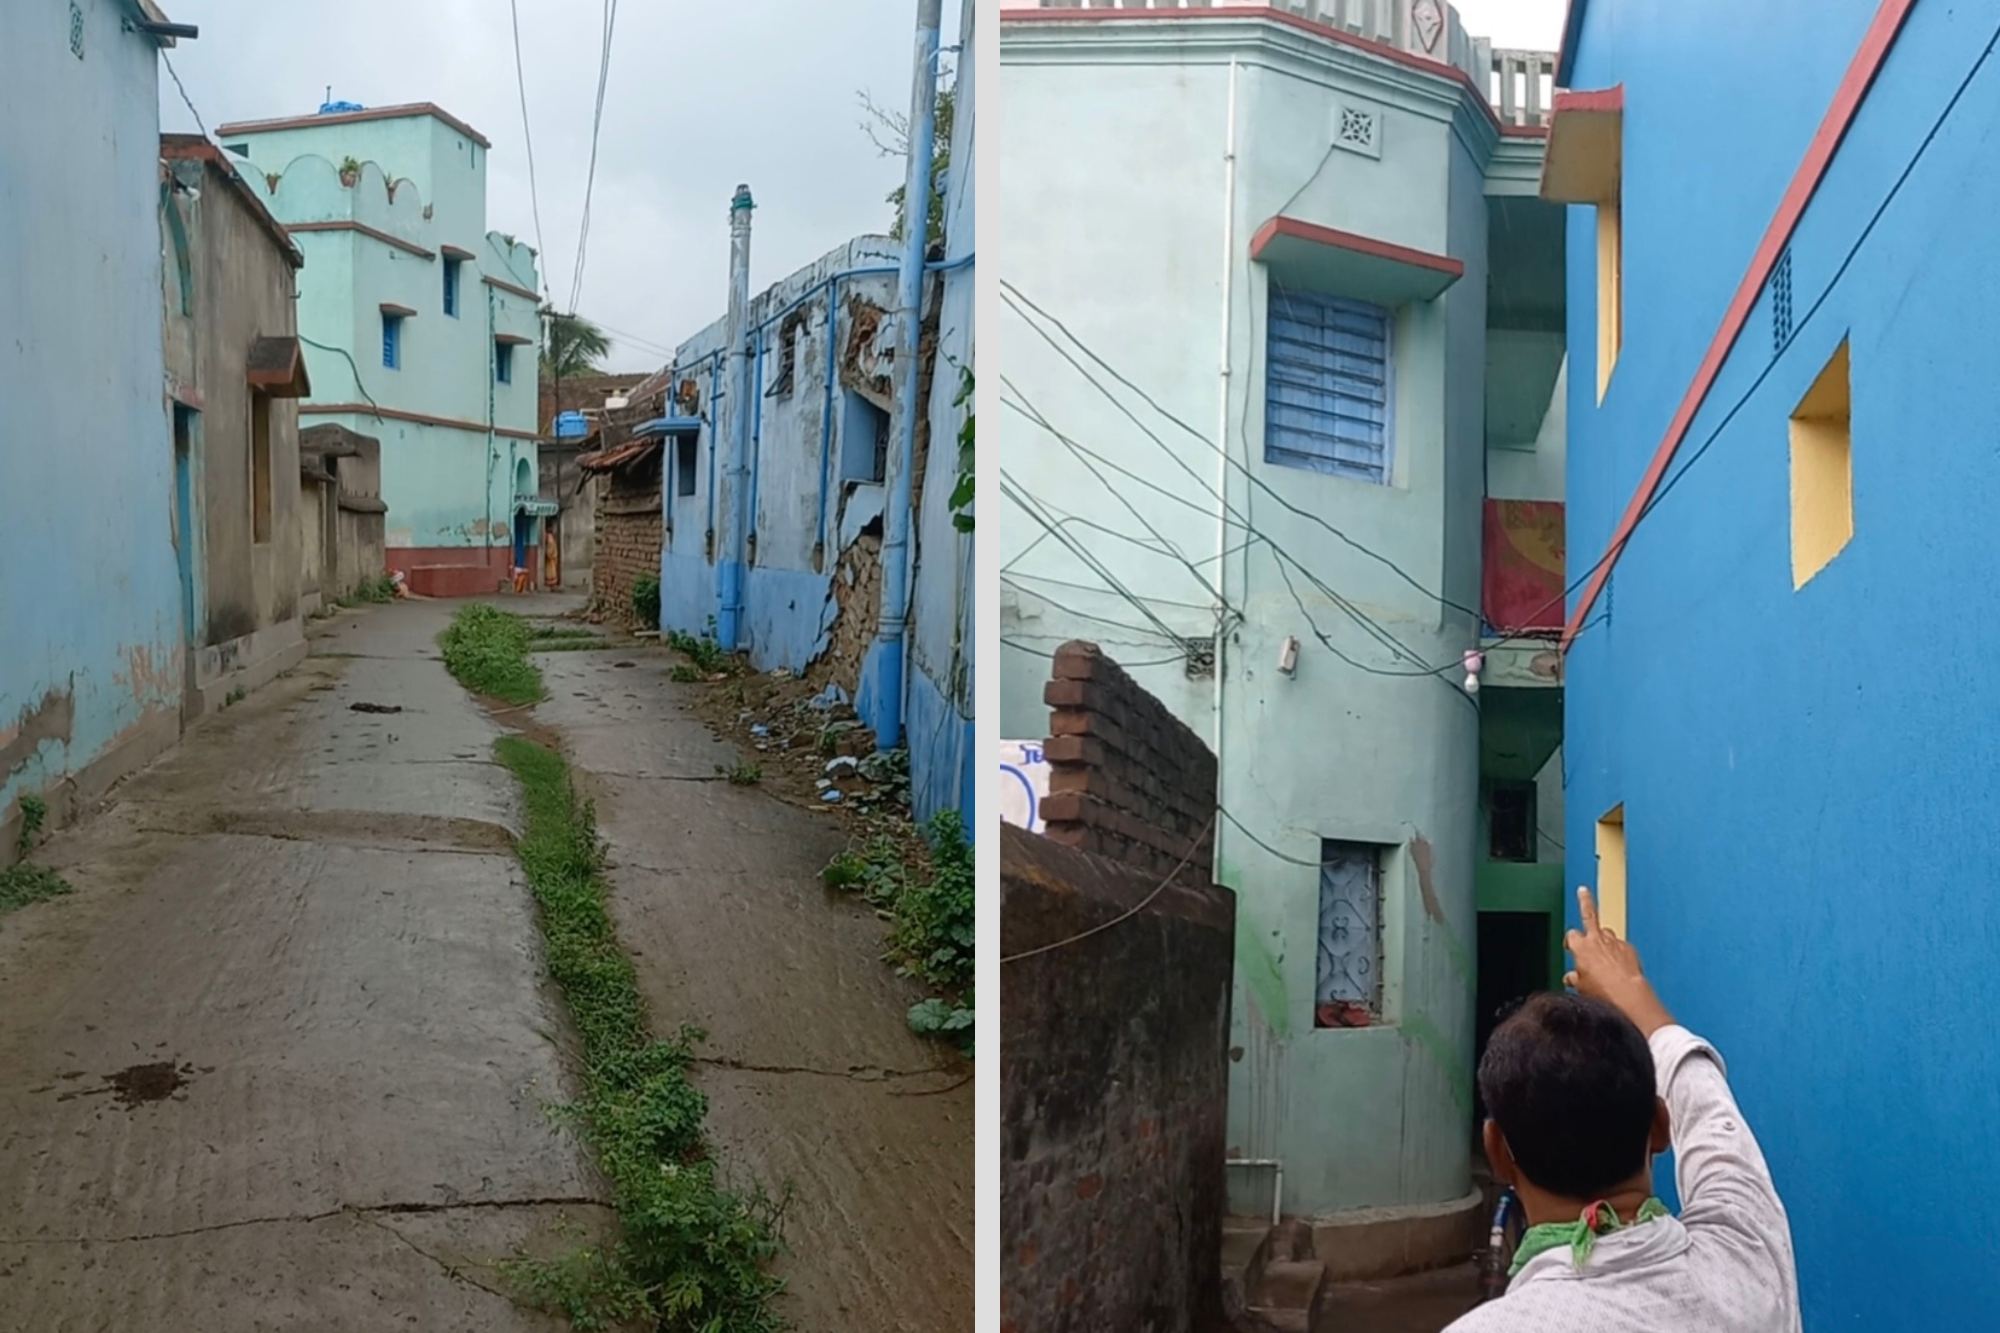 On the left, a photo of a road bearing cracks, as blue houses crumble on both sides. On the right, a photo of a man pointing towards two blue houses.